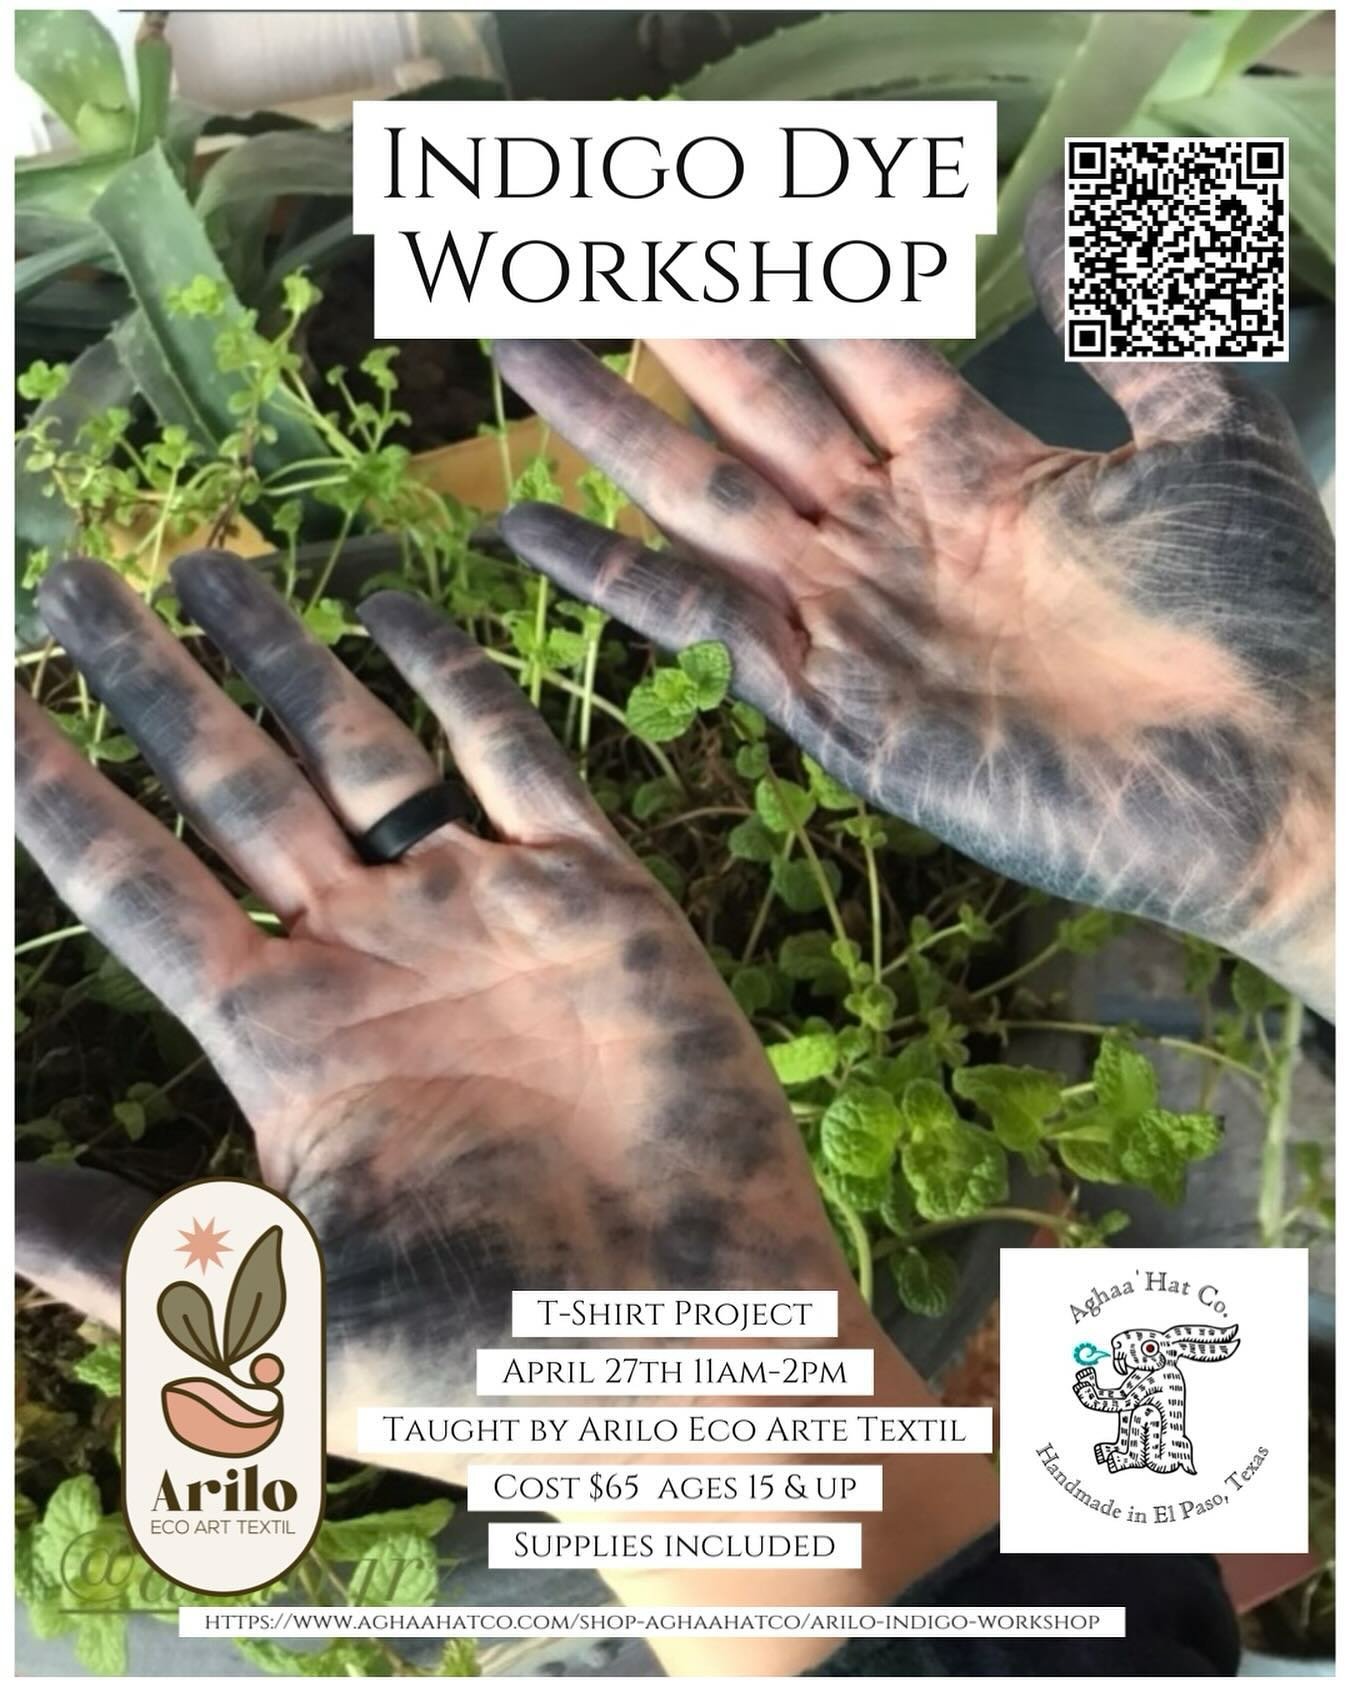 ➕Indigo Dye Workshop
⚫️T-shirt Project
➕All supplies included 
In this workshop you will learn the history of Indigo, its importance in the lives of our ancestors and application in modern society. In this 3 hr journey, we will be focusing on the dev